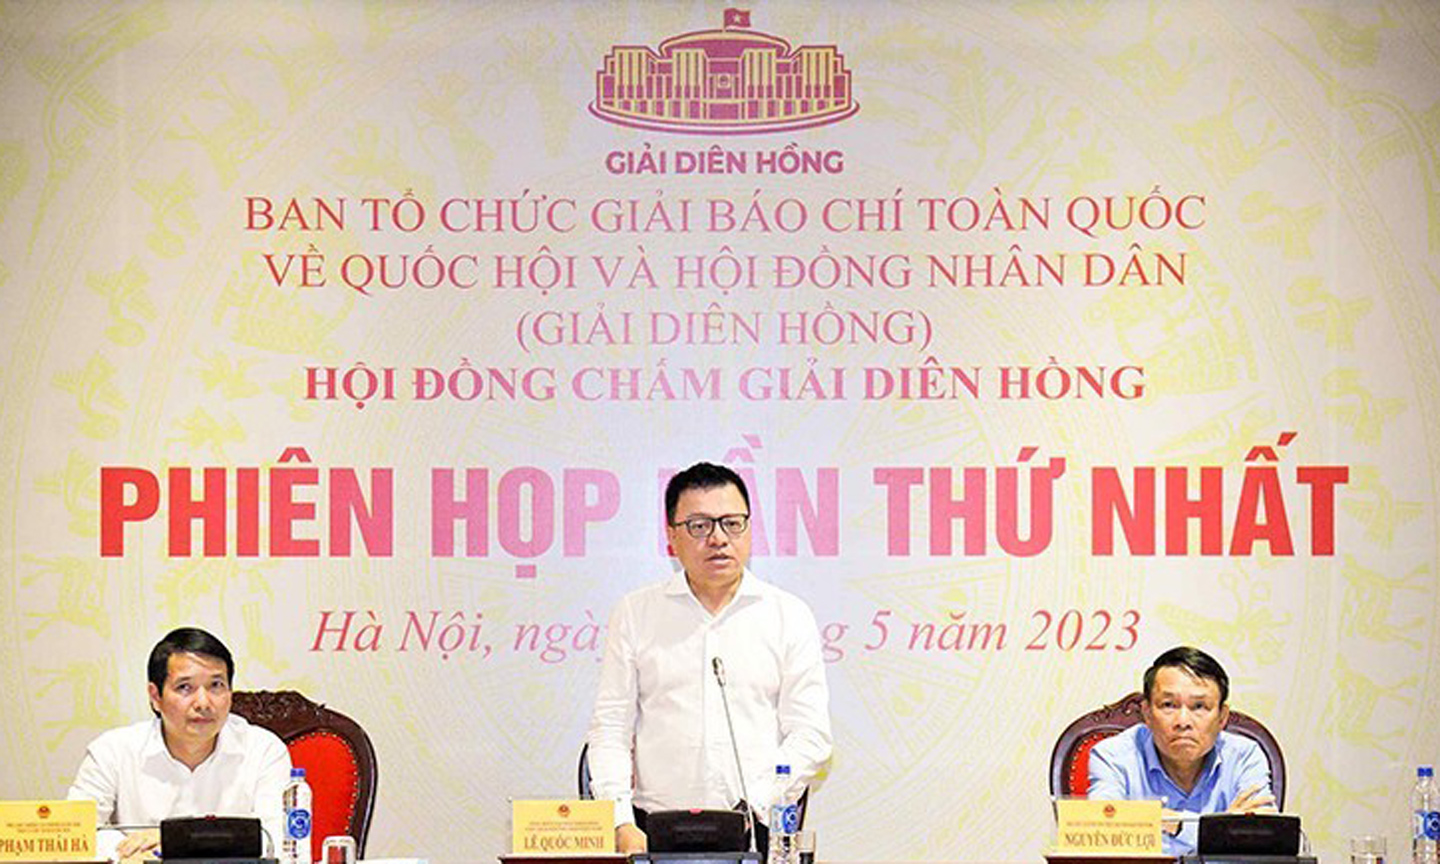 Editor-in-Chief of Nhan Dan Newspaper and Chairman of Vietnam Journalists’ Association Le Quoc Minh (C) speaks at the meeting.